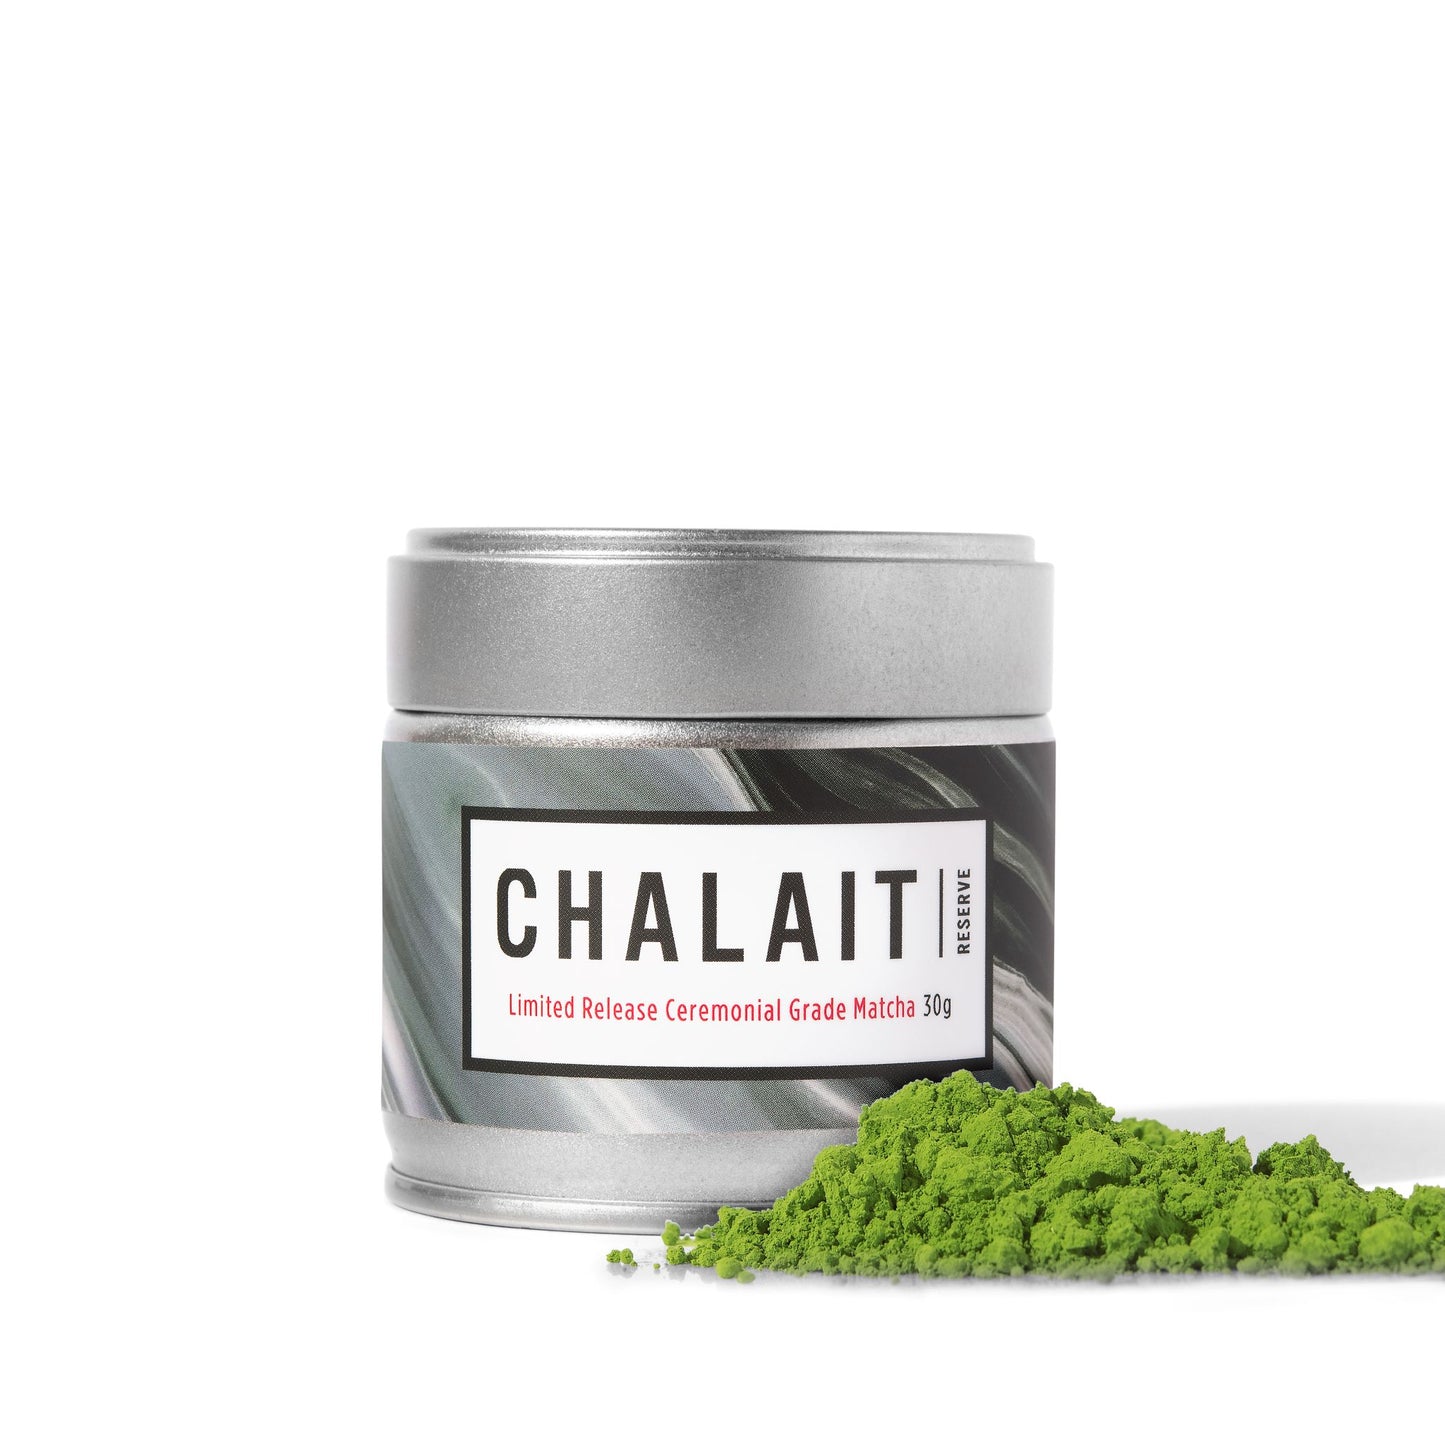 Limited Release Ceremonial Grade Matcha